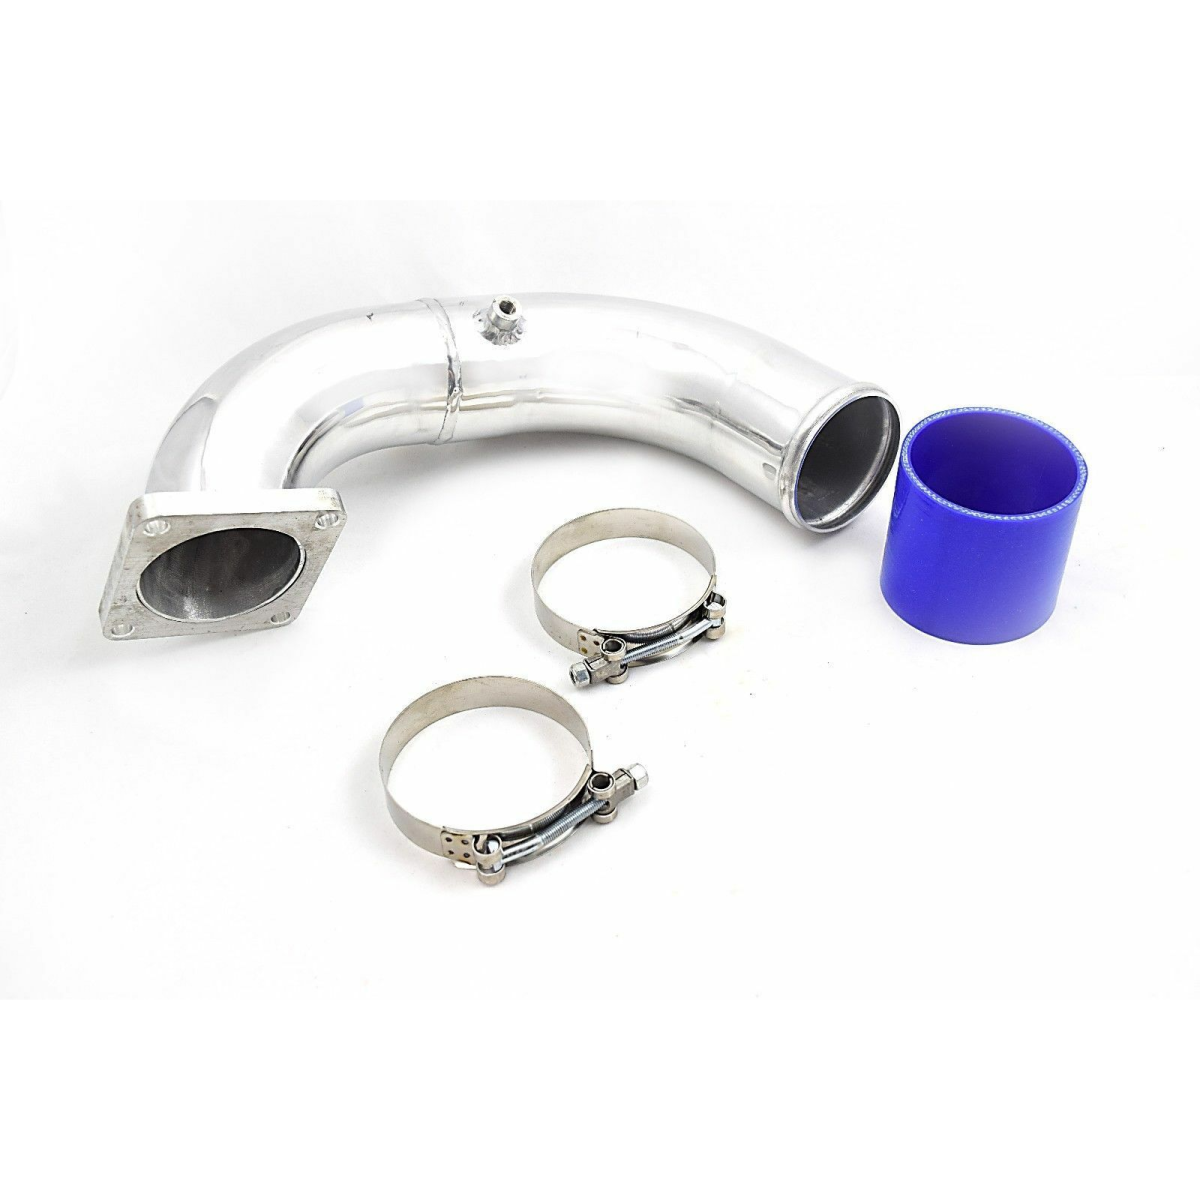 Rudy's Performance Parts - Rudy's 3.5" Polished Intake Elbow For 94-98 5.9 Cummins